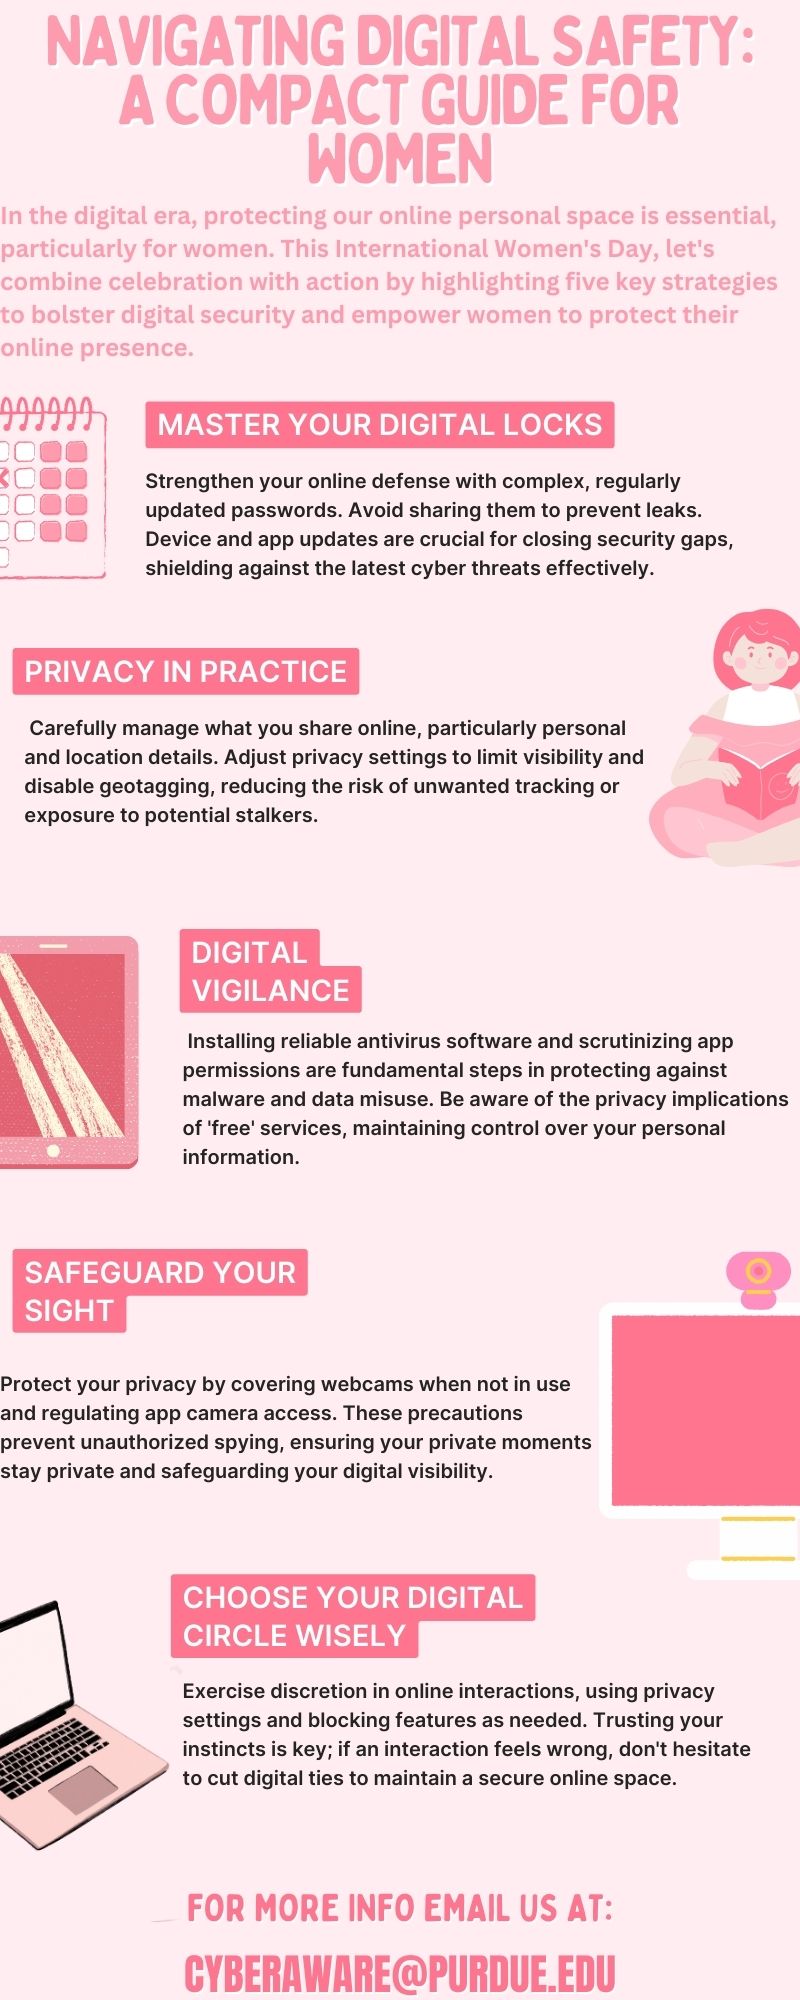 Navigating-Digital-Safety-A-Compact-Guide-for-Women.jpg